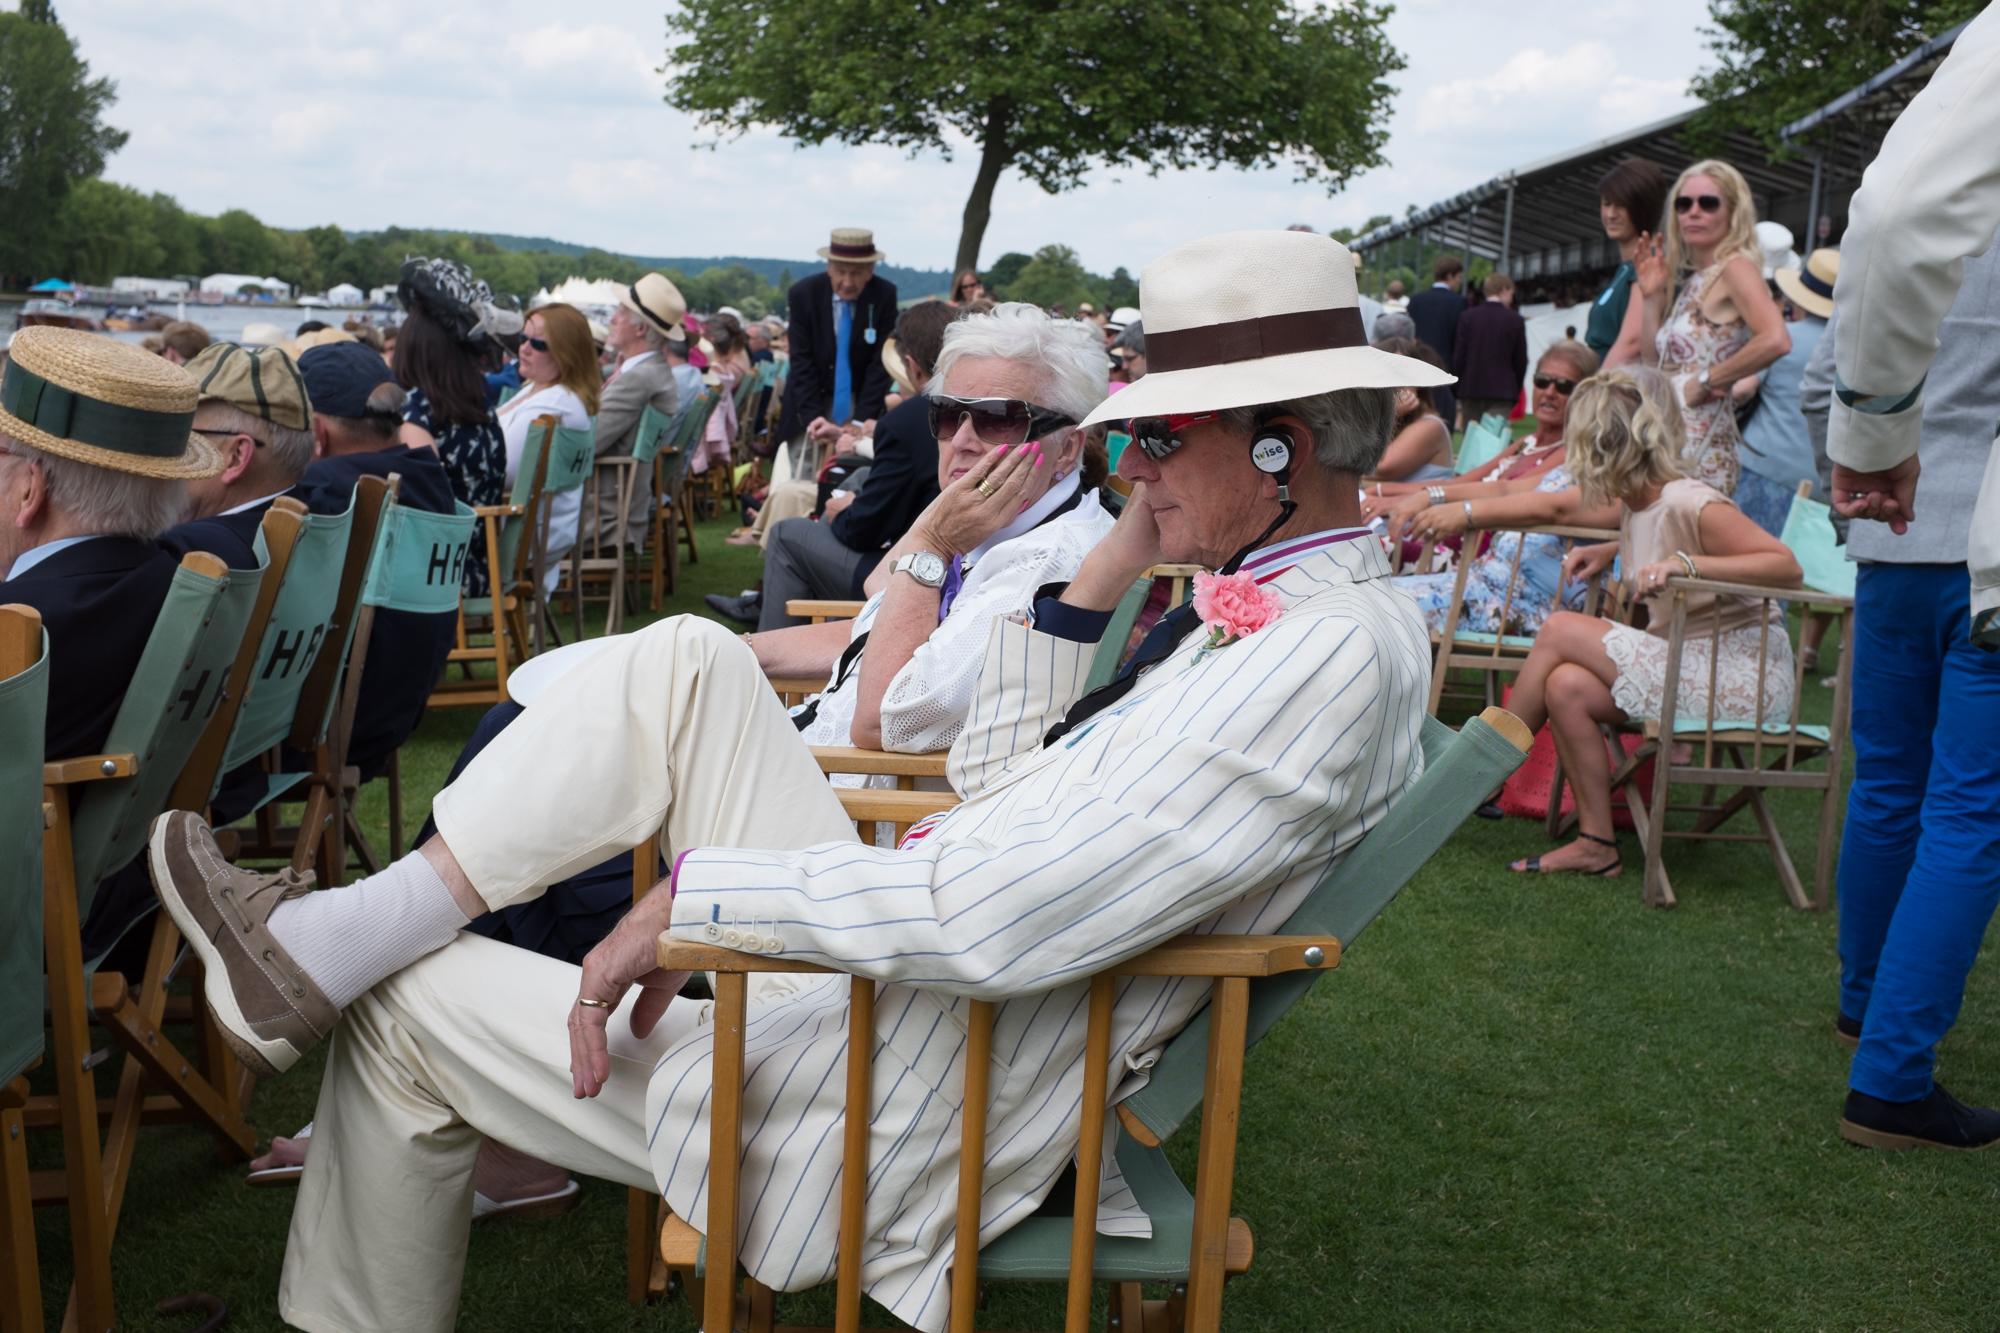  At Henley Royal Regatta, listening to Regatta Radio – a pop-up radio station that broadcasts racing commentary and interviews with athletes throughout the week. 